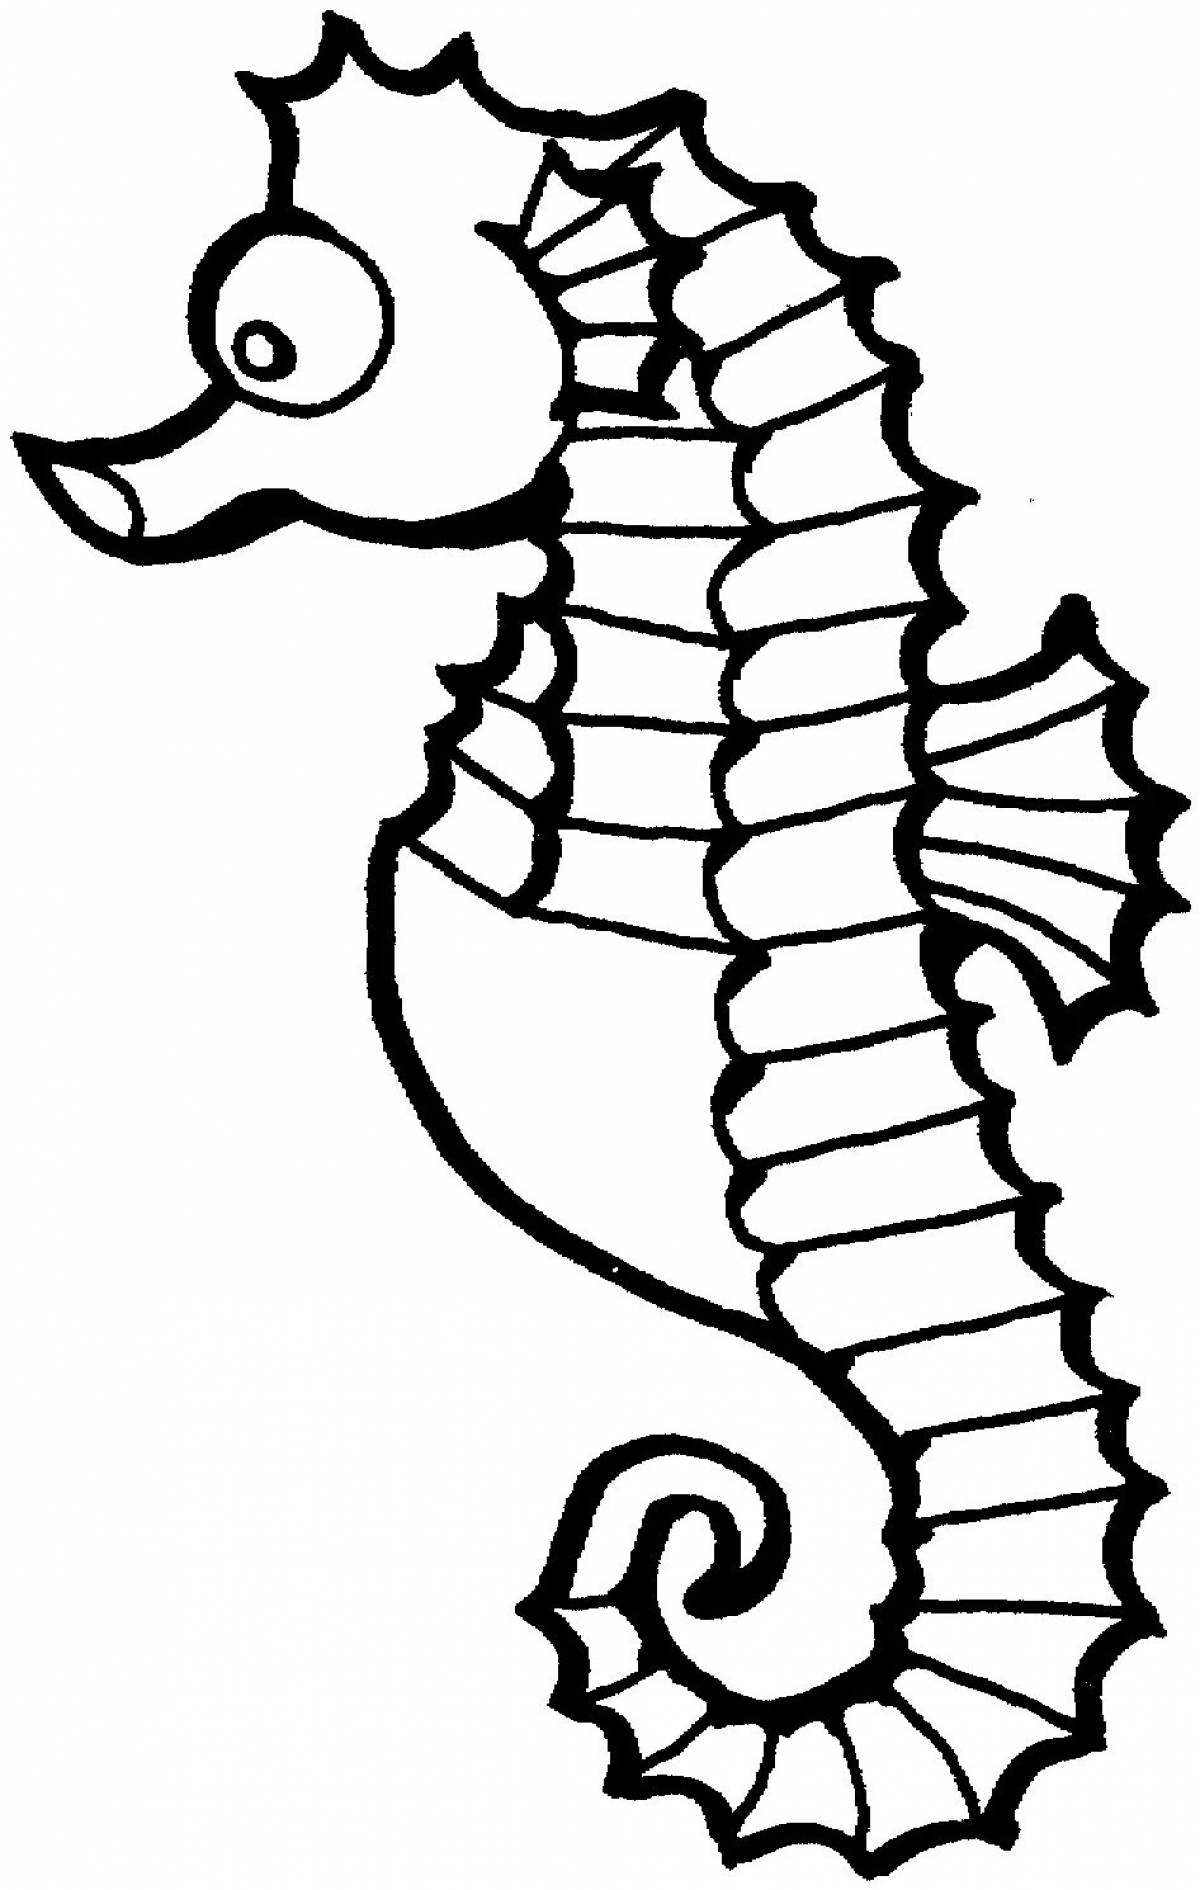 Seahorse for kids #3